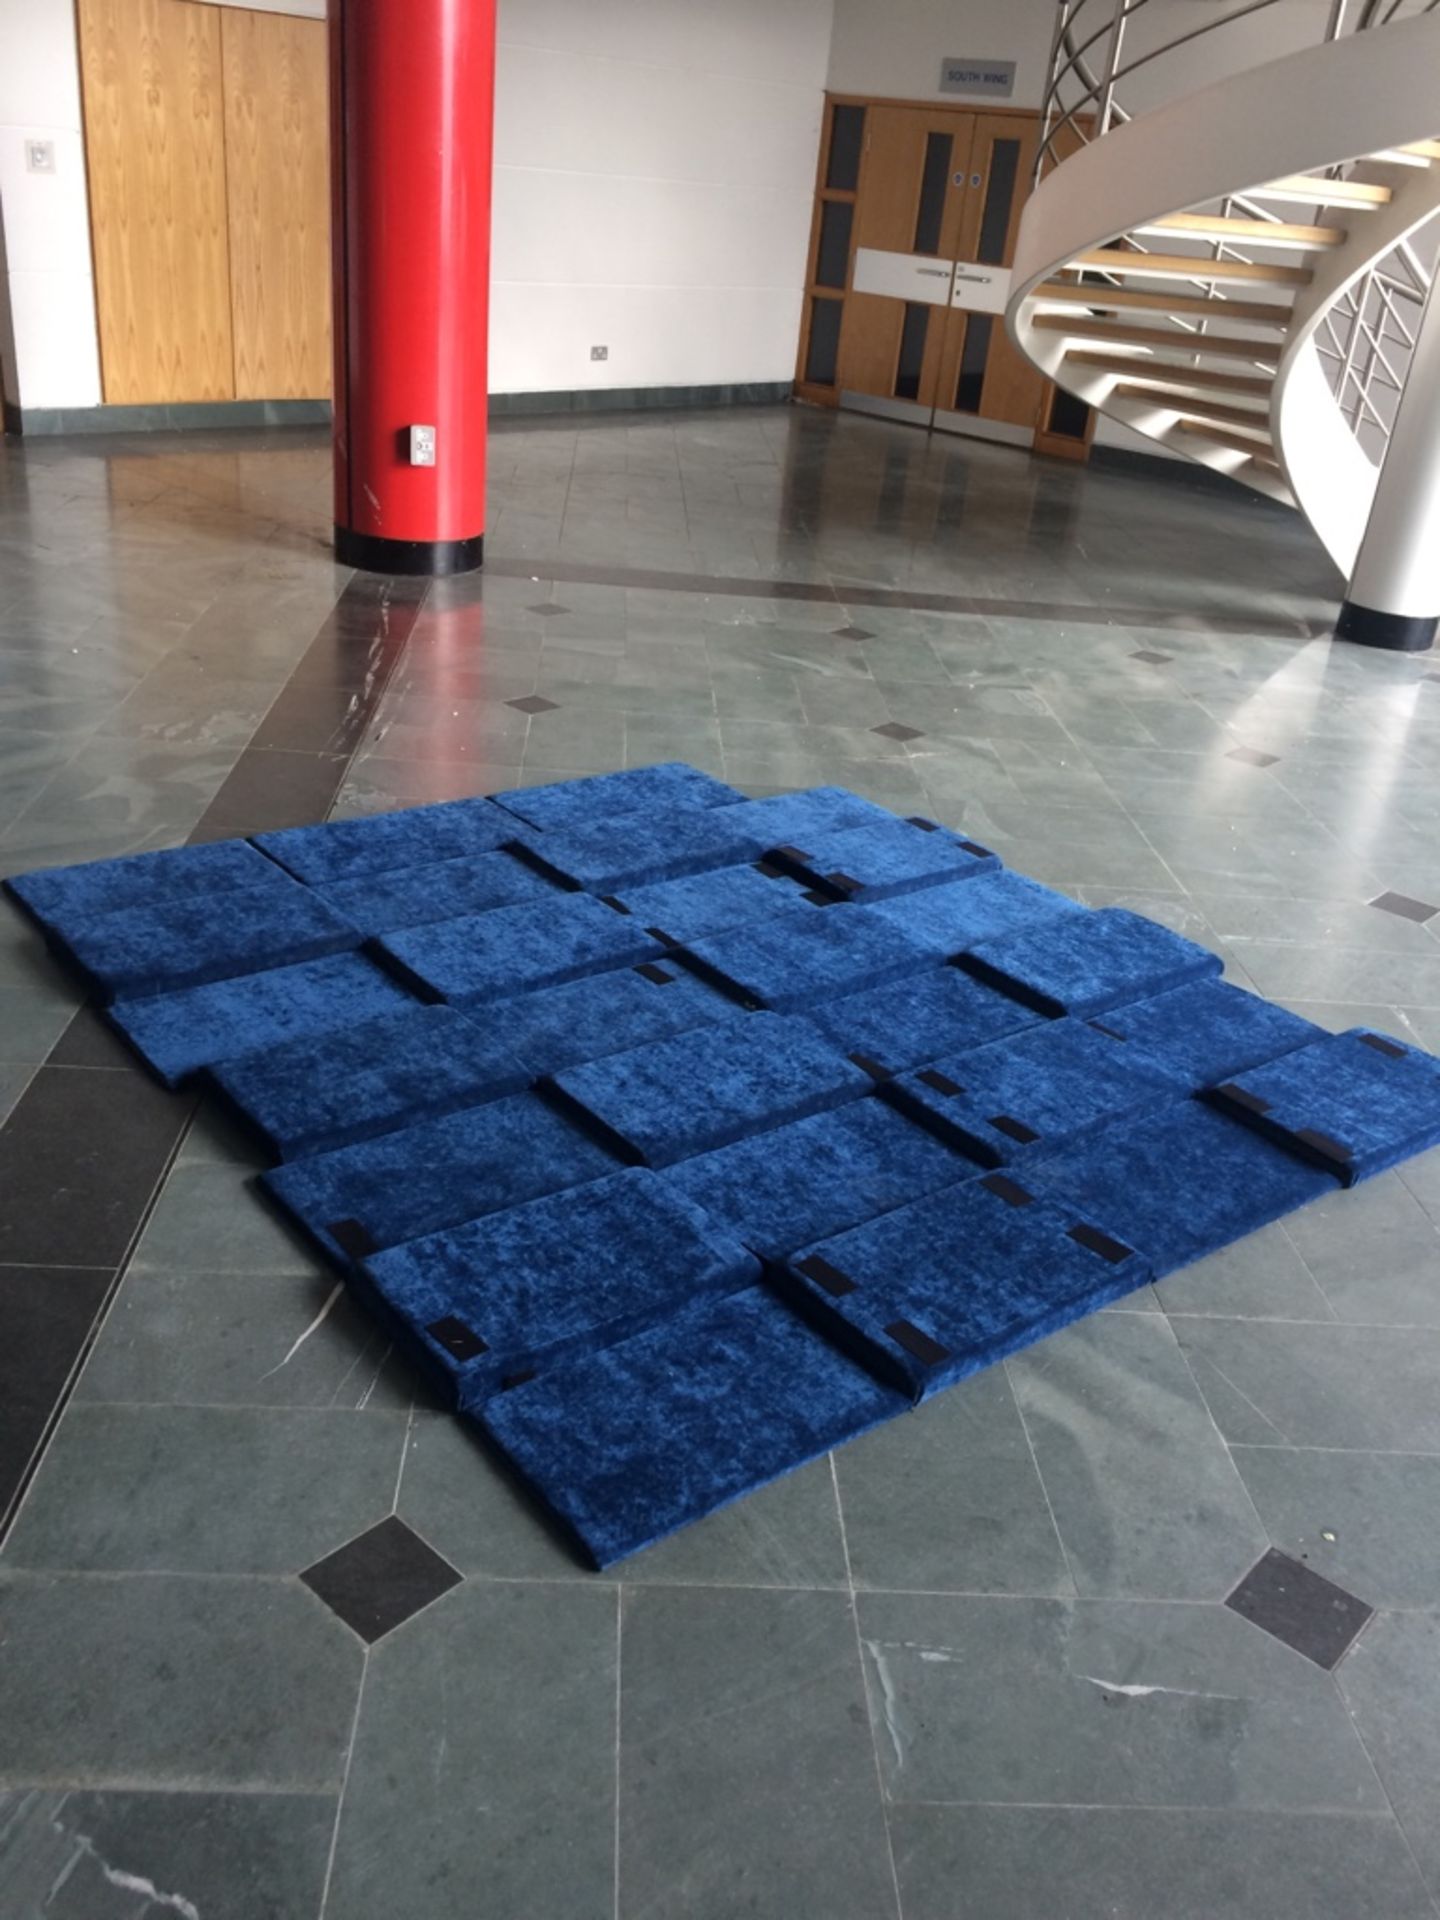 Velvet Wall Cladding Panels Previously Used On Entrance Hall Feature Wall Velcro Fixes To Any Wall